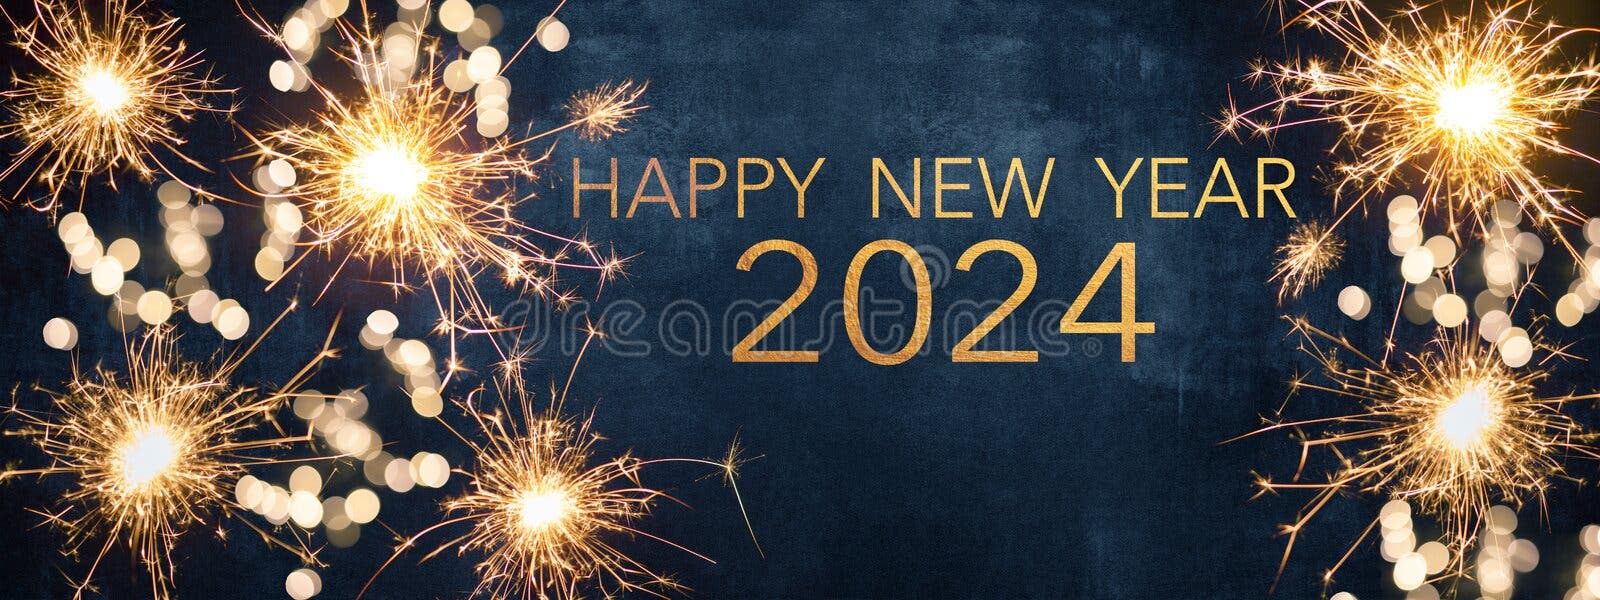 HAPPY NEW YEAR 2023 Party Background Greeting Card - Sparklers and ...